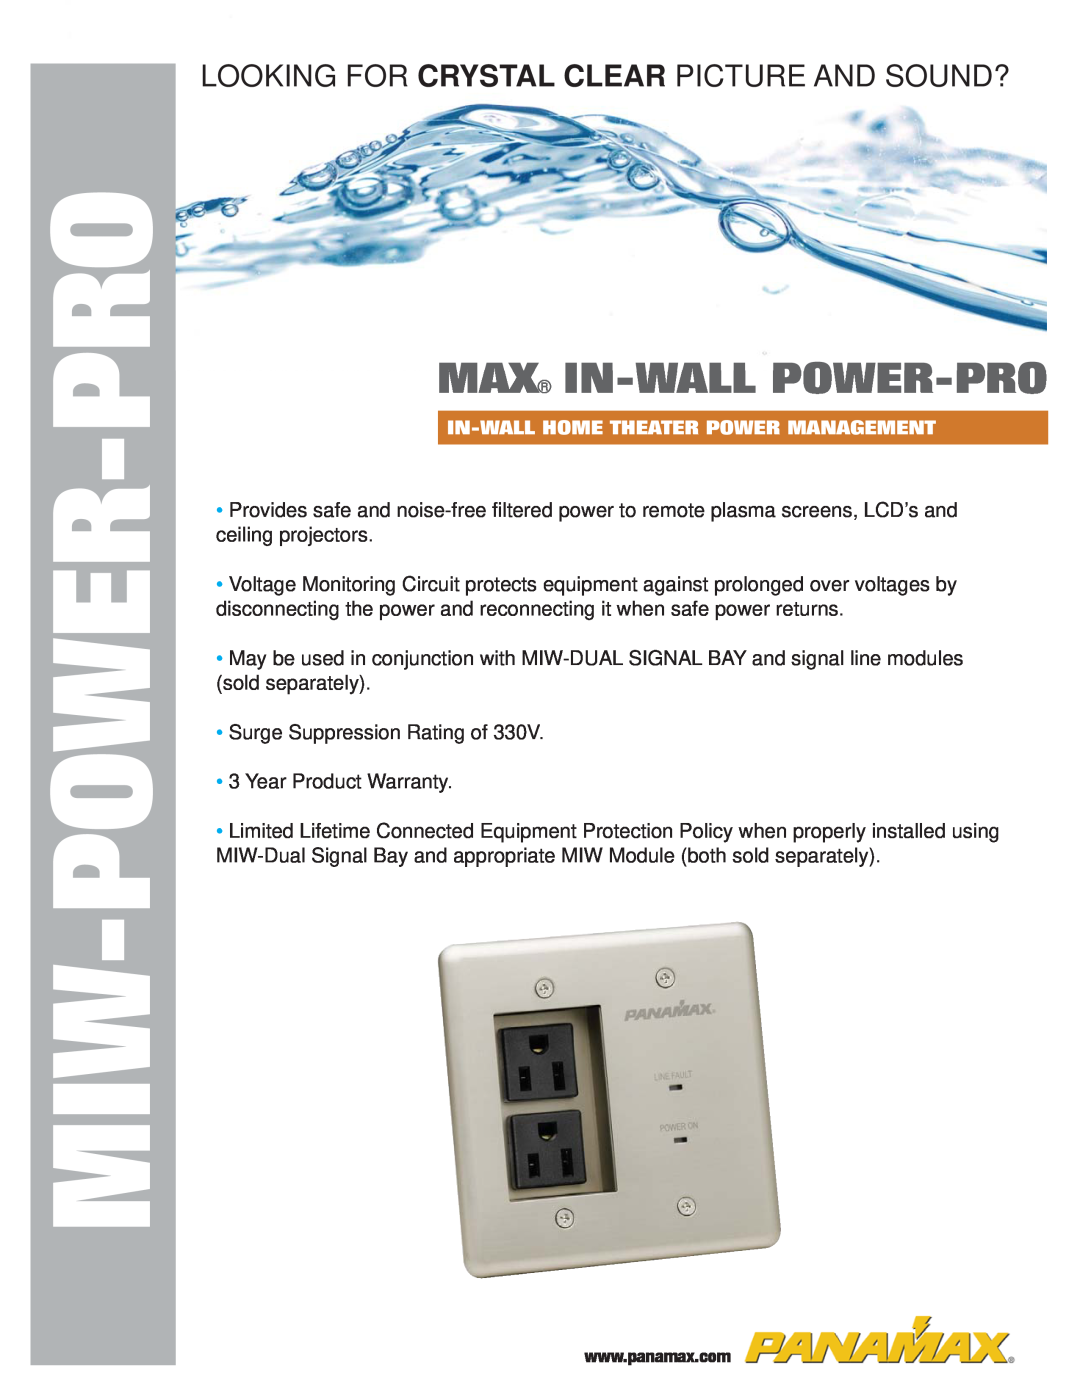 Panamax In-Wall Home Theater Power Management warranty Miw-Power-Pro, Max In-Wall Power-Pro 